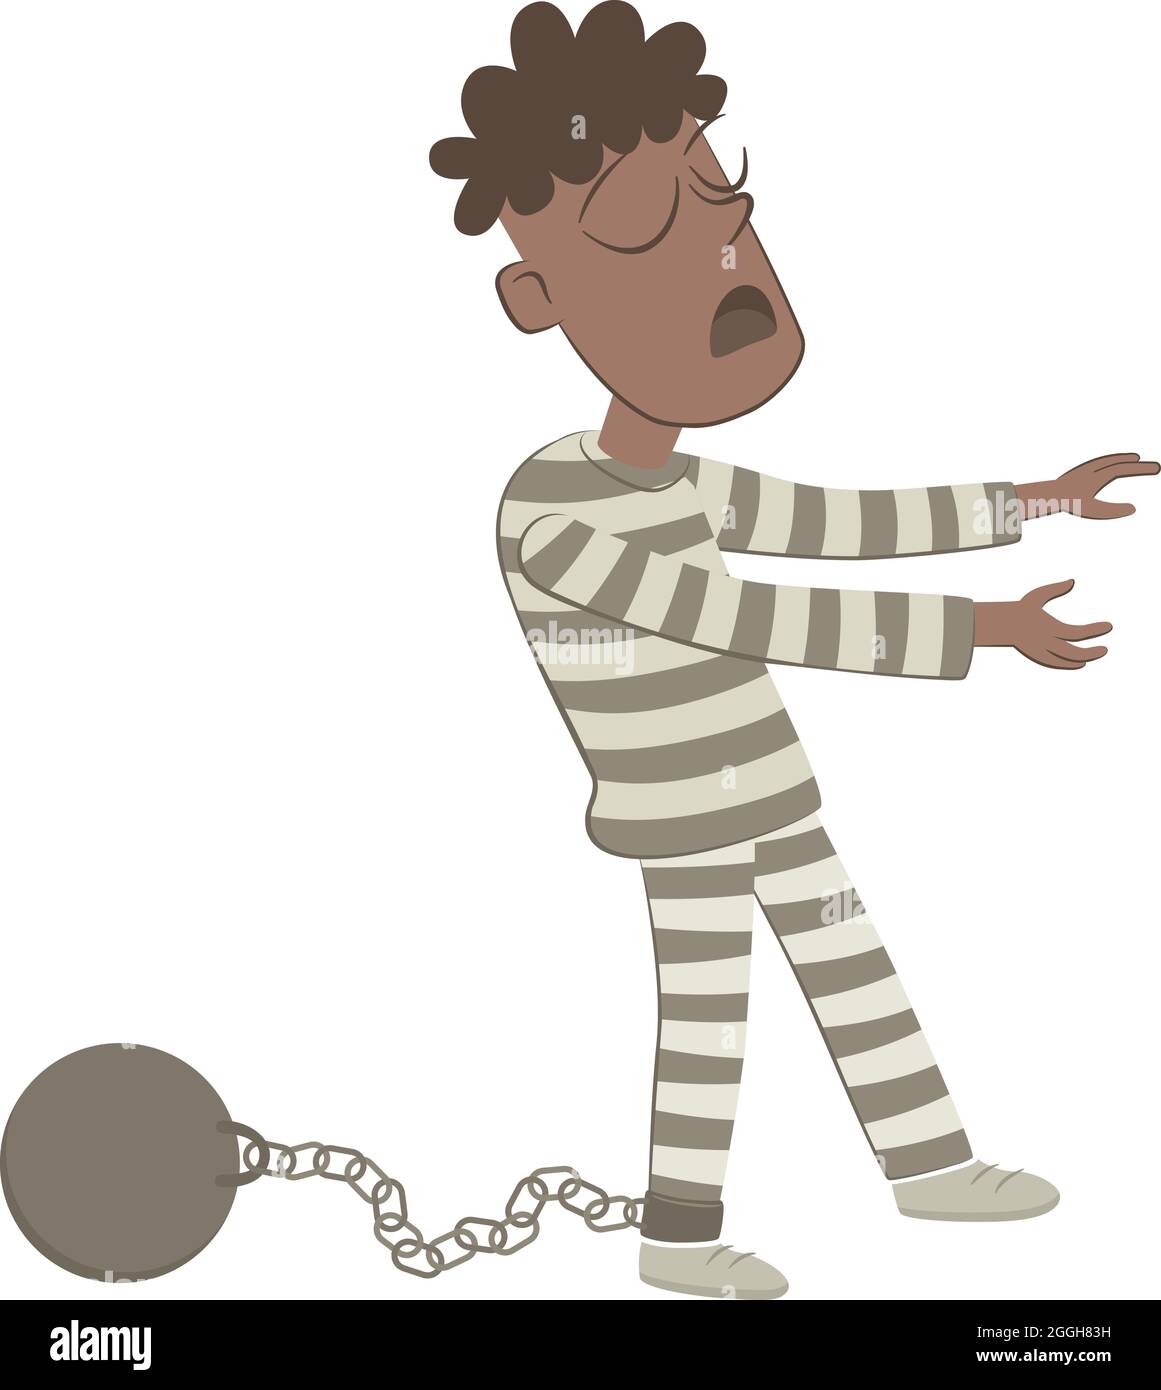 Retro style illustration of a boy dressed as a zombie prisoner for the Halloween party. Stock Vector